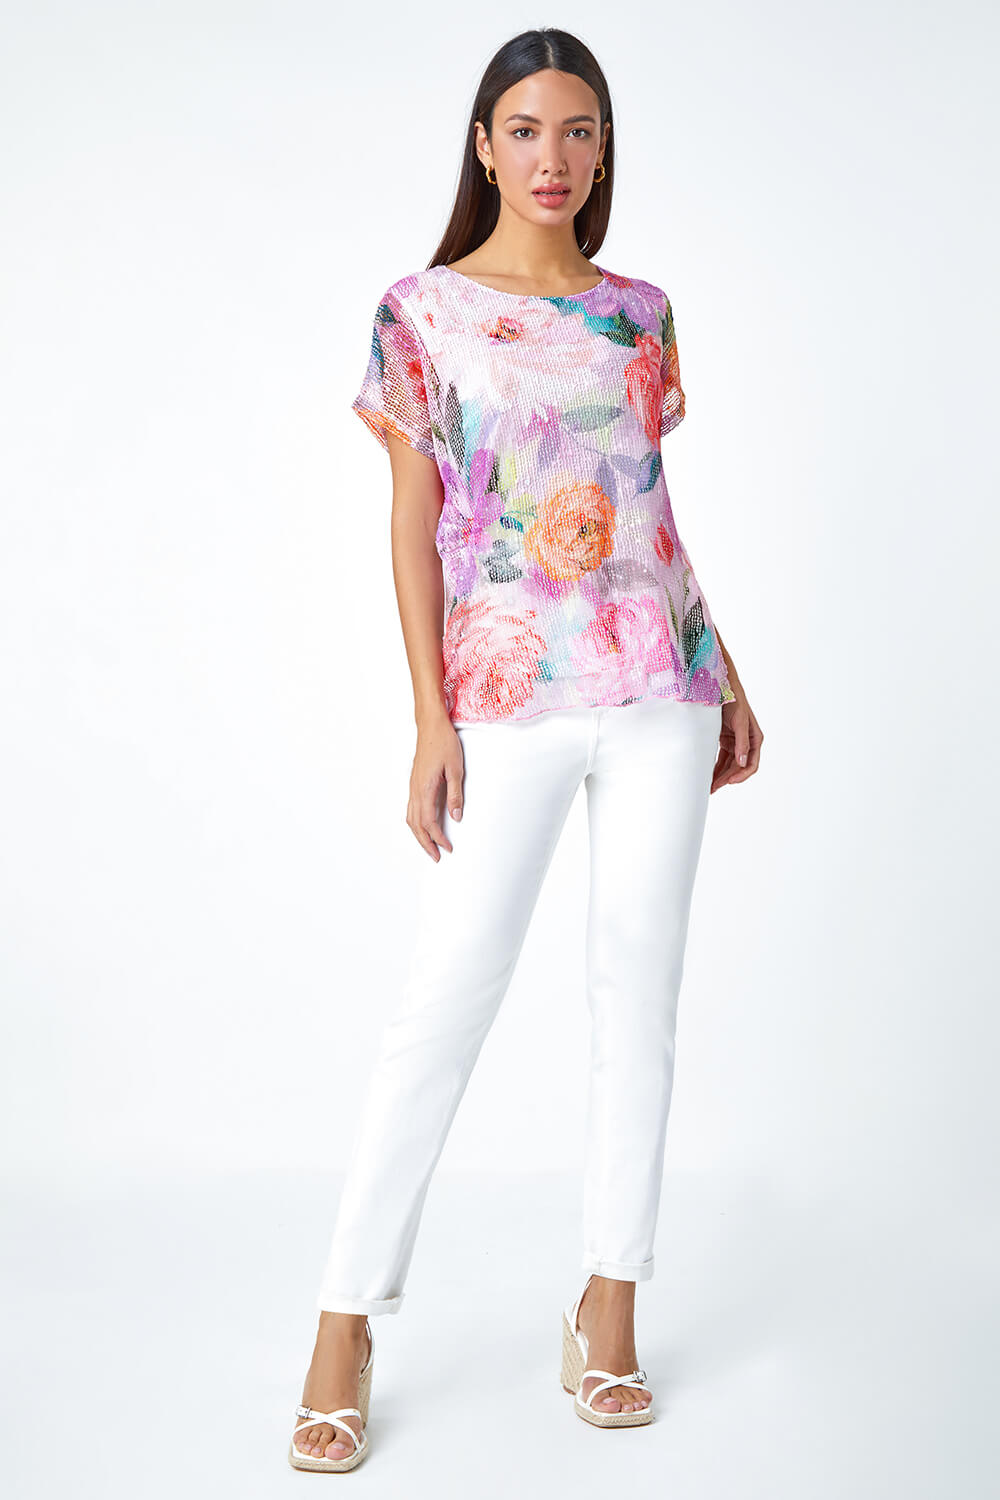 PINK Mesh Overlay Floral Print T-Shirt, Image 2 of 5